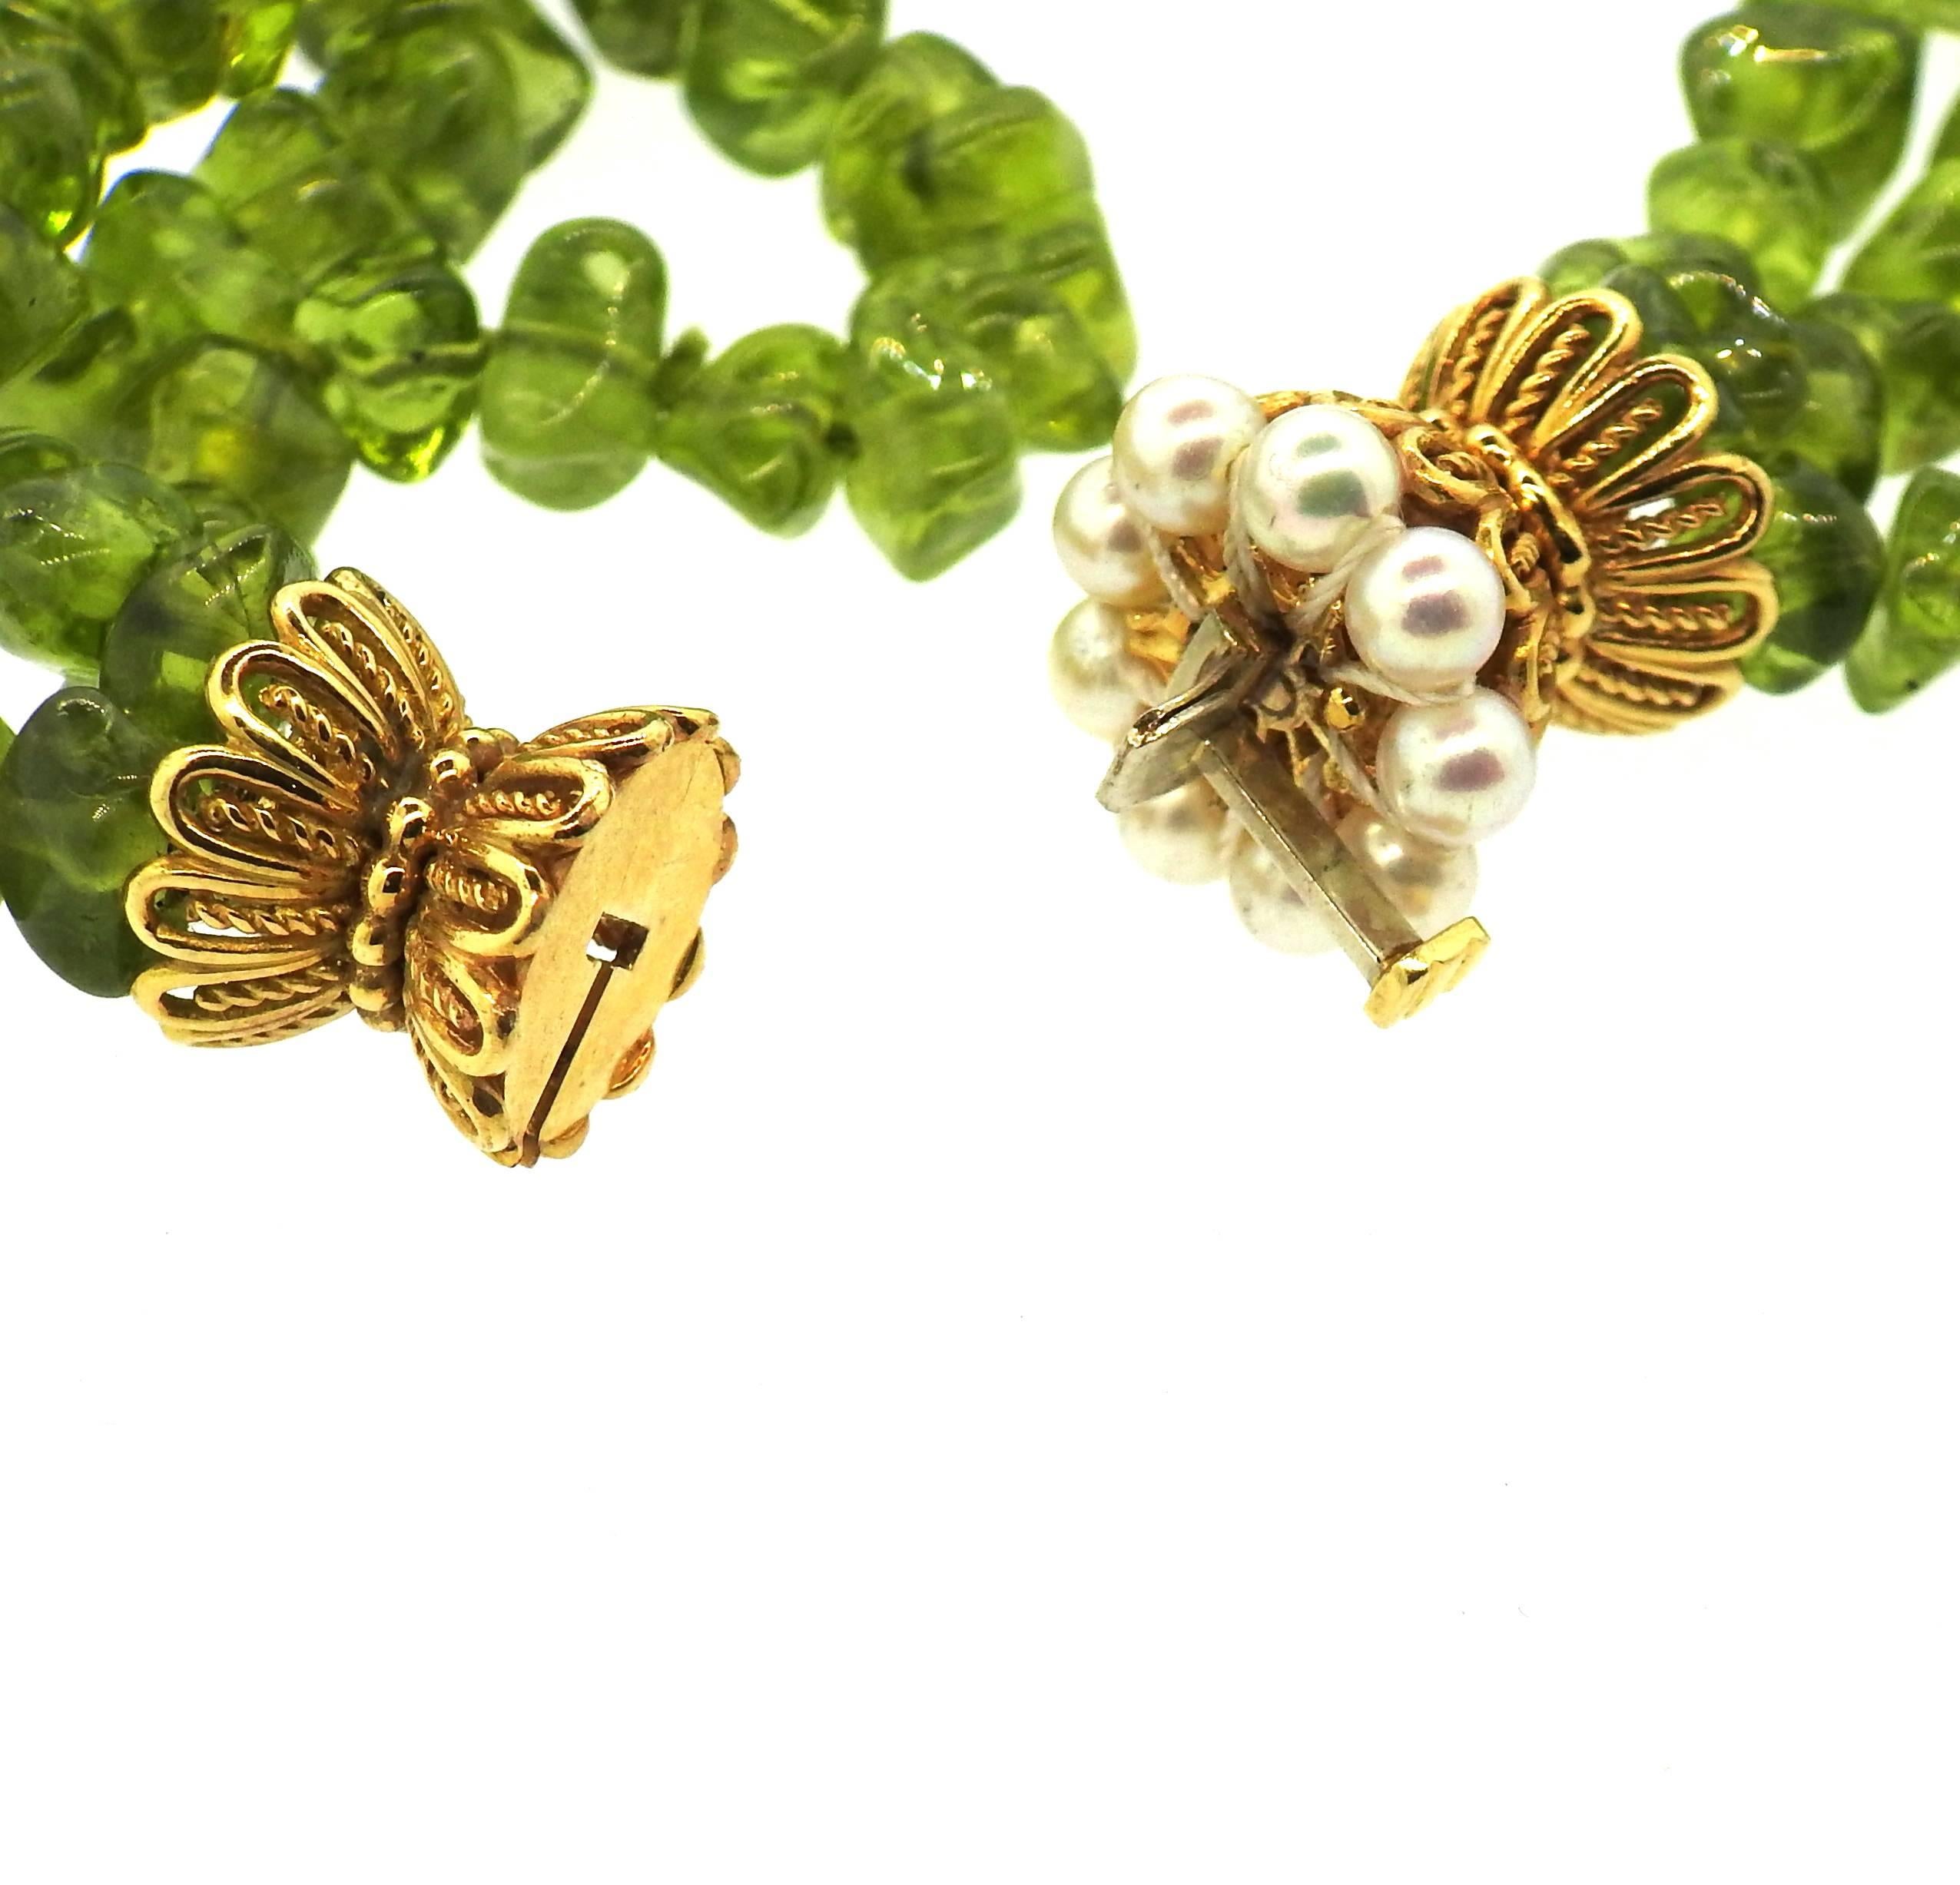 An 18k yellow gold necklace set with peridot beads and 4.3mm pearls.  The necklace measures 28